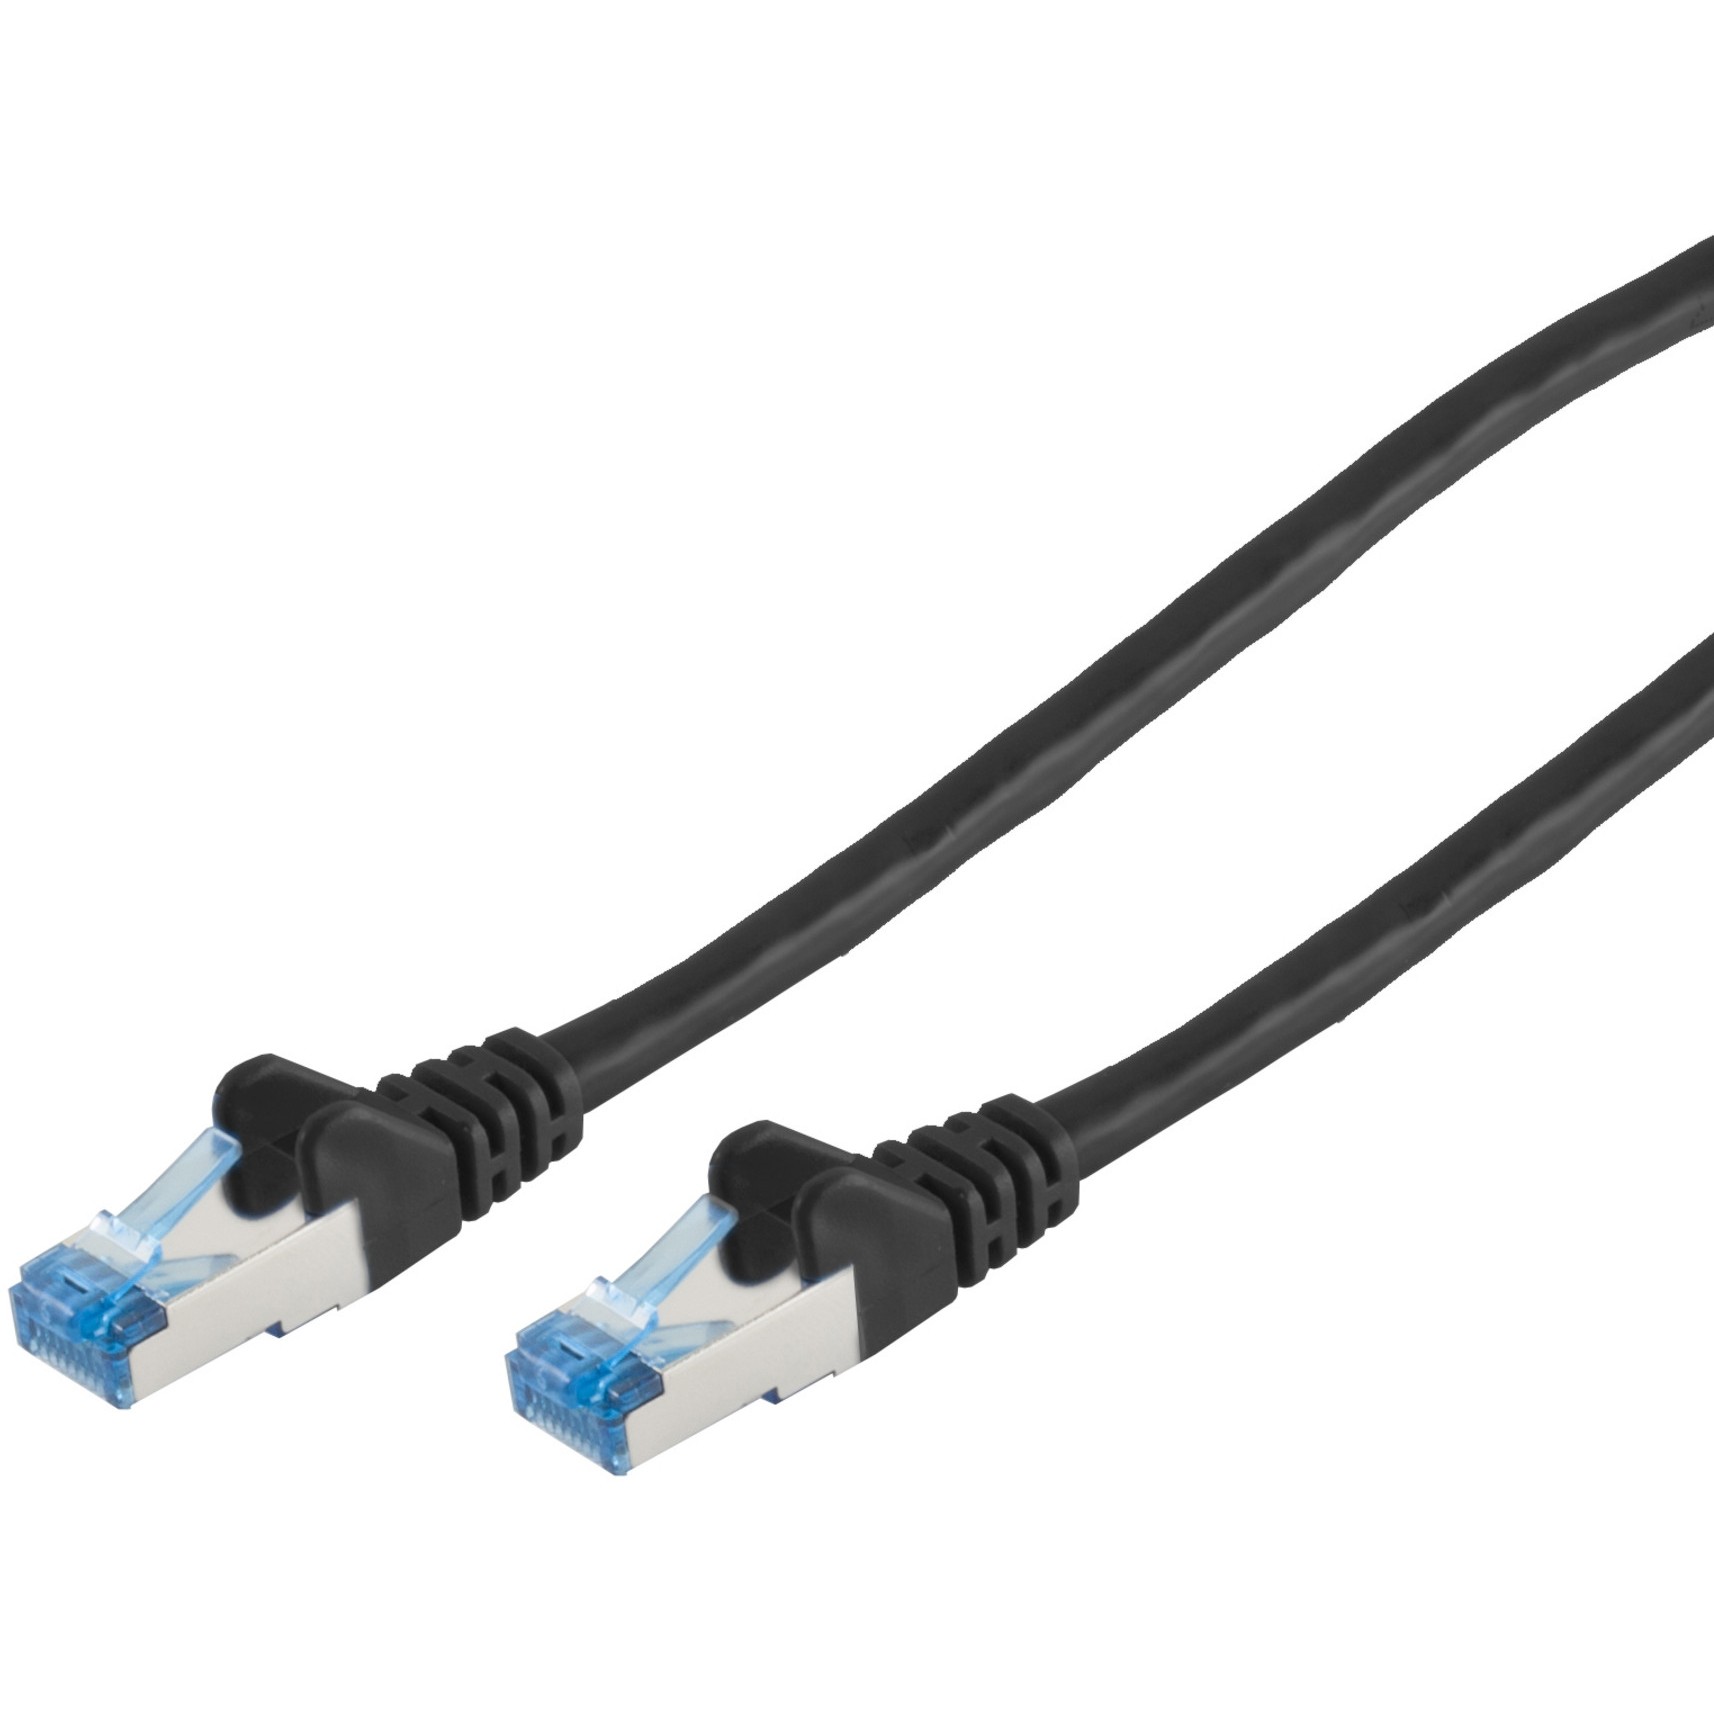 S-Conn 75711-0.5S networking cable